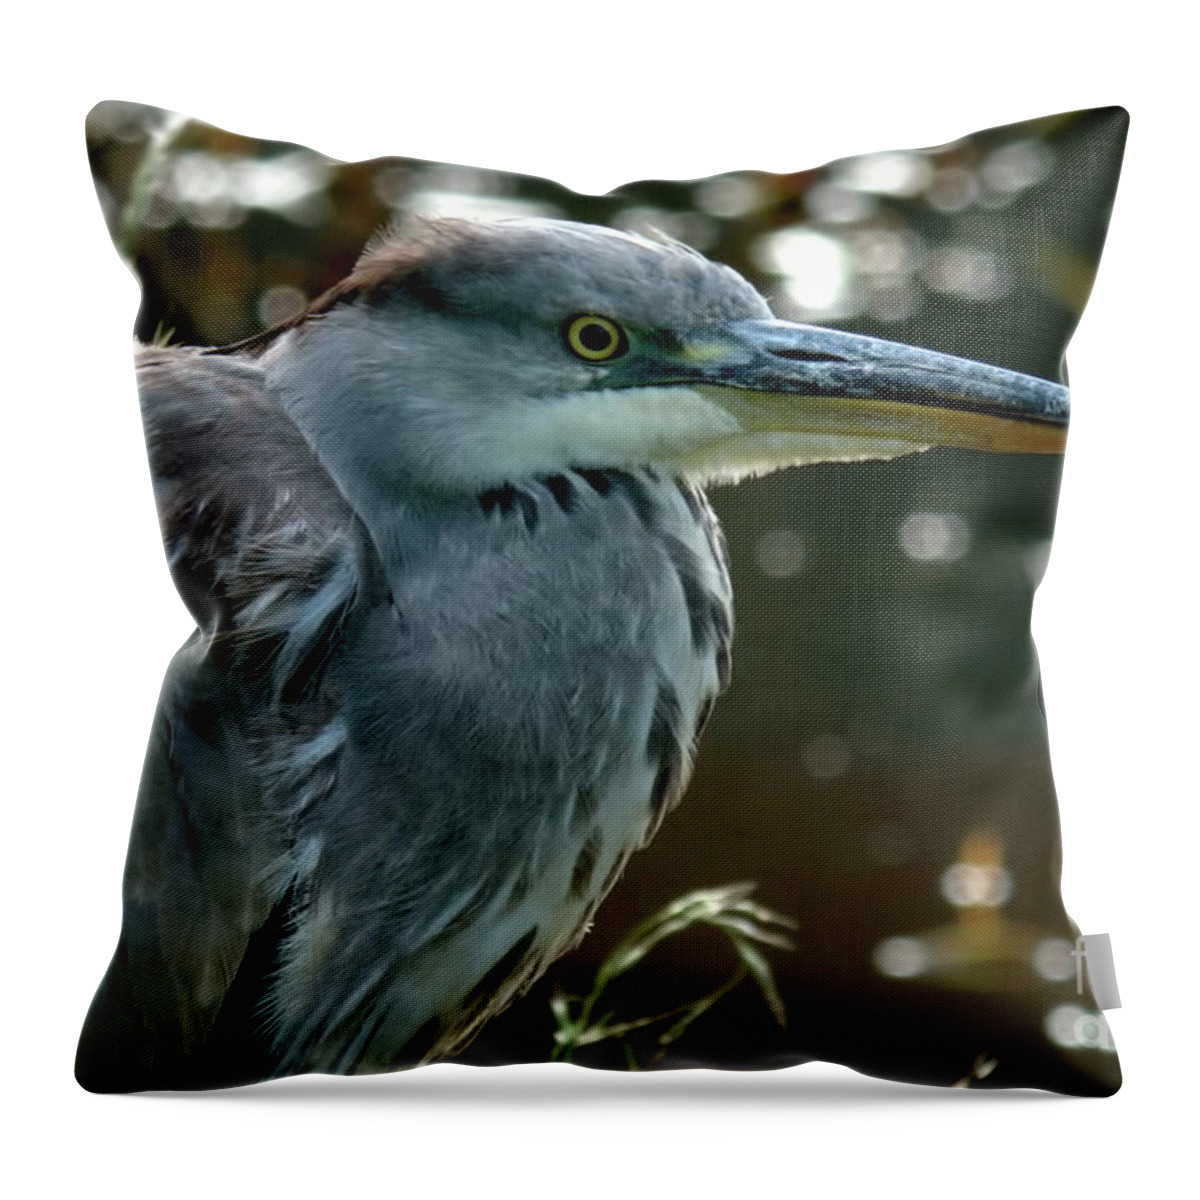 Bird Throw Pillow featuring the photograph Herons Looking At You Kid by Stephen Melia